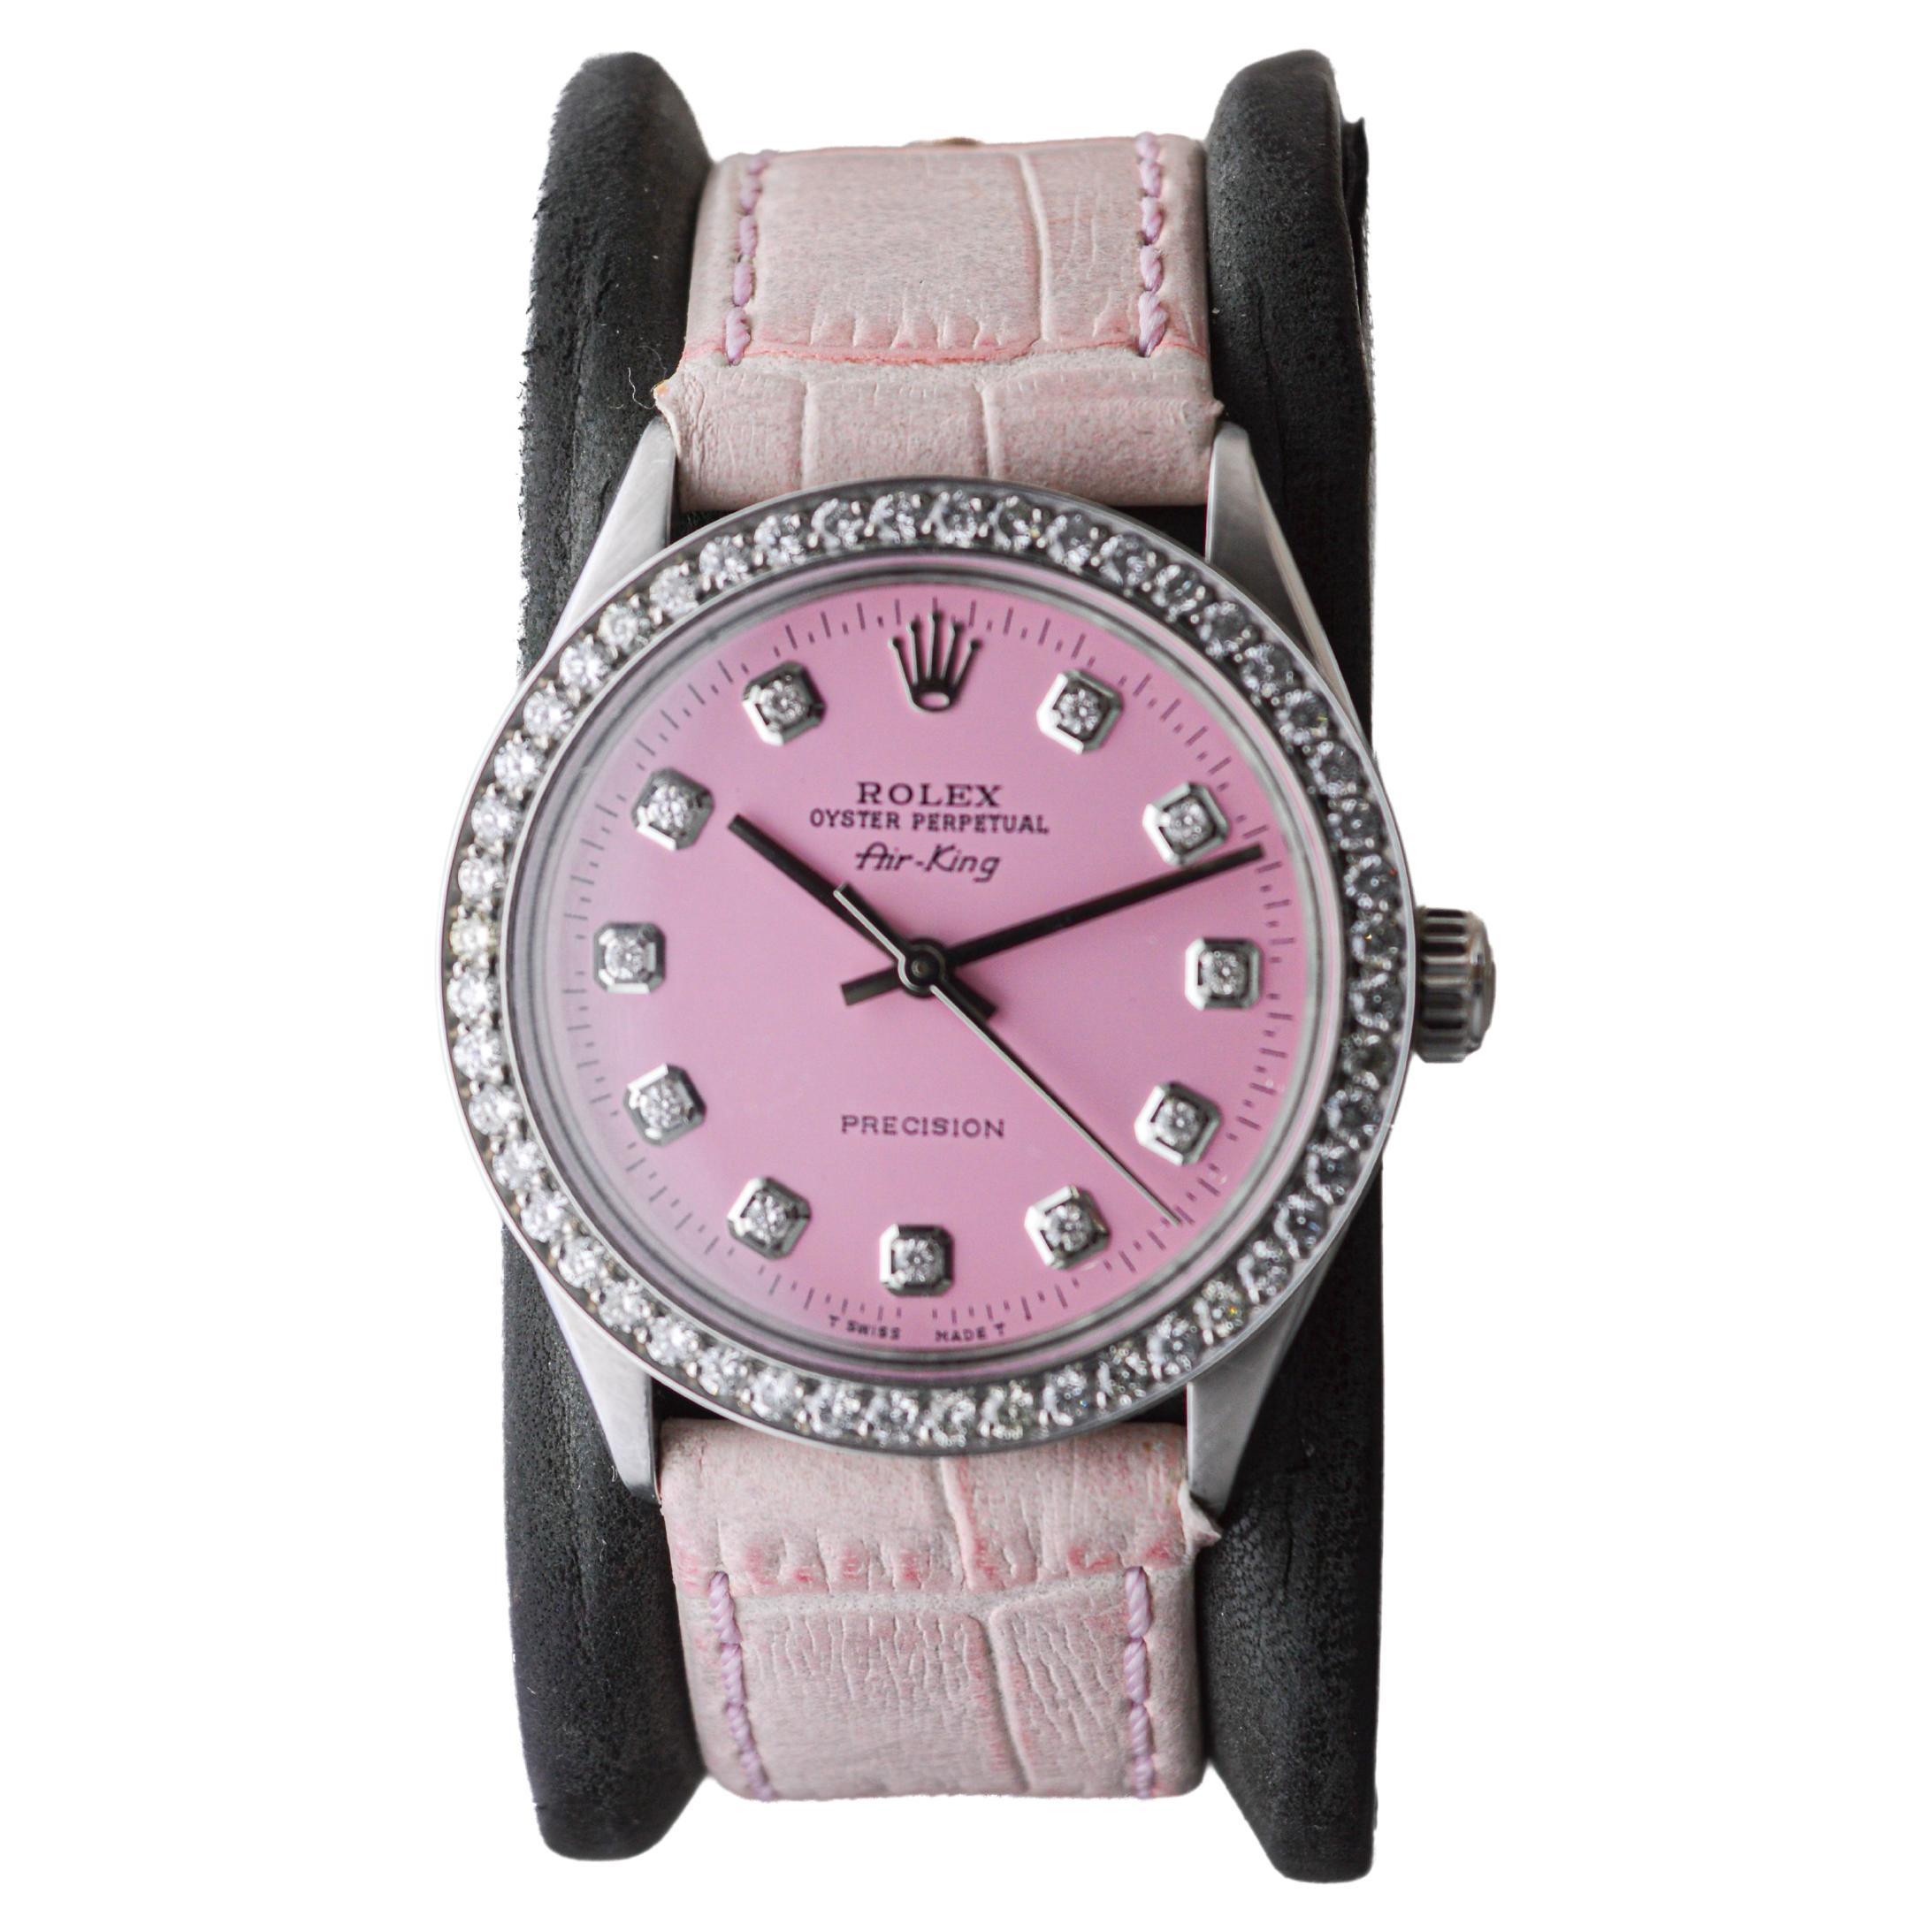 Modern Rolex Steel Air King with Custom Made Pink Dial and Diamond Bezel circa 1970's For Sale